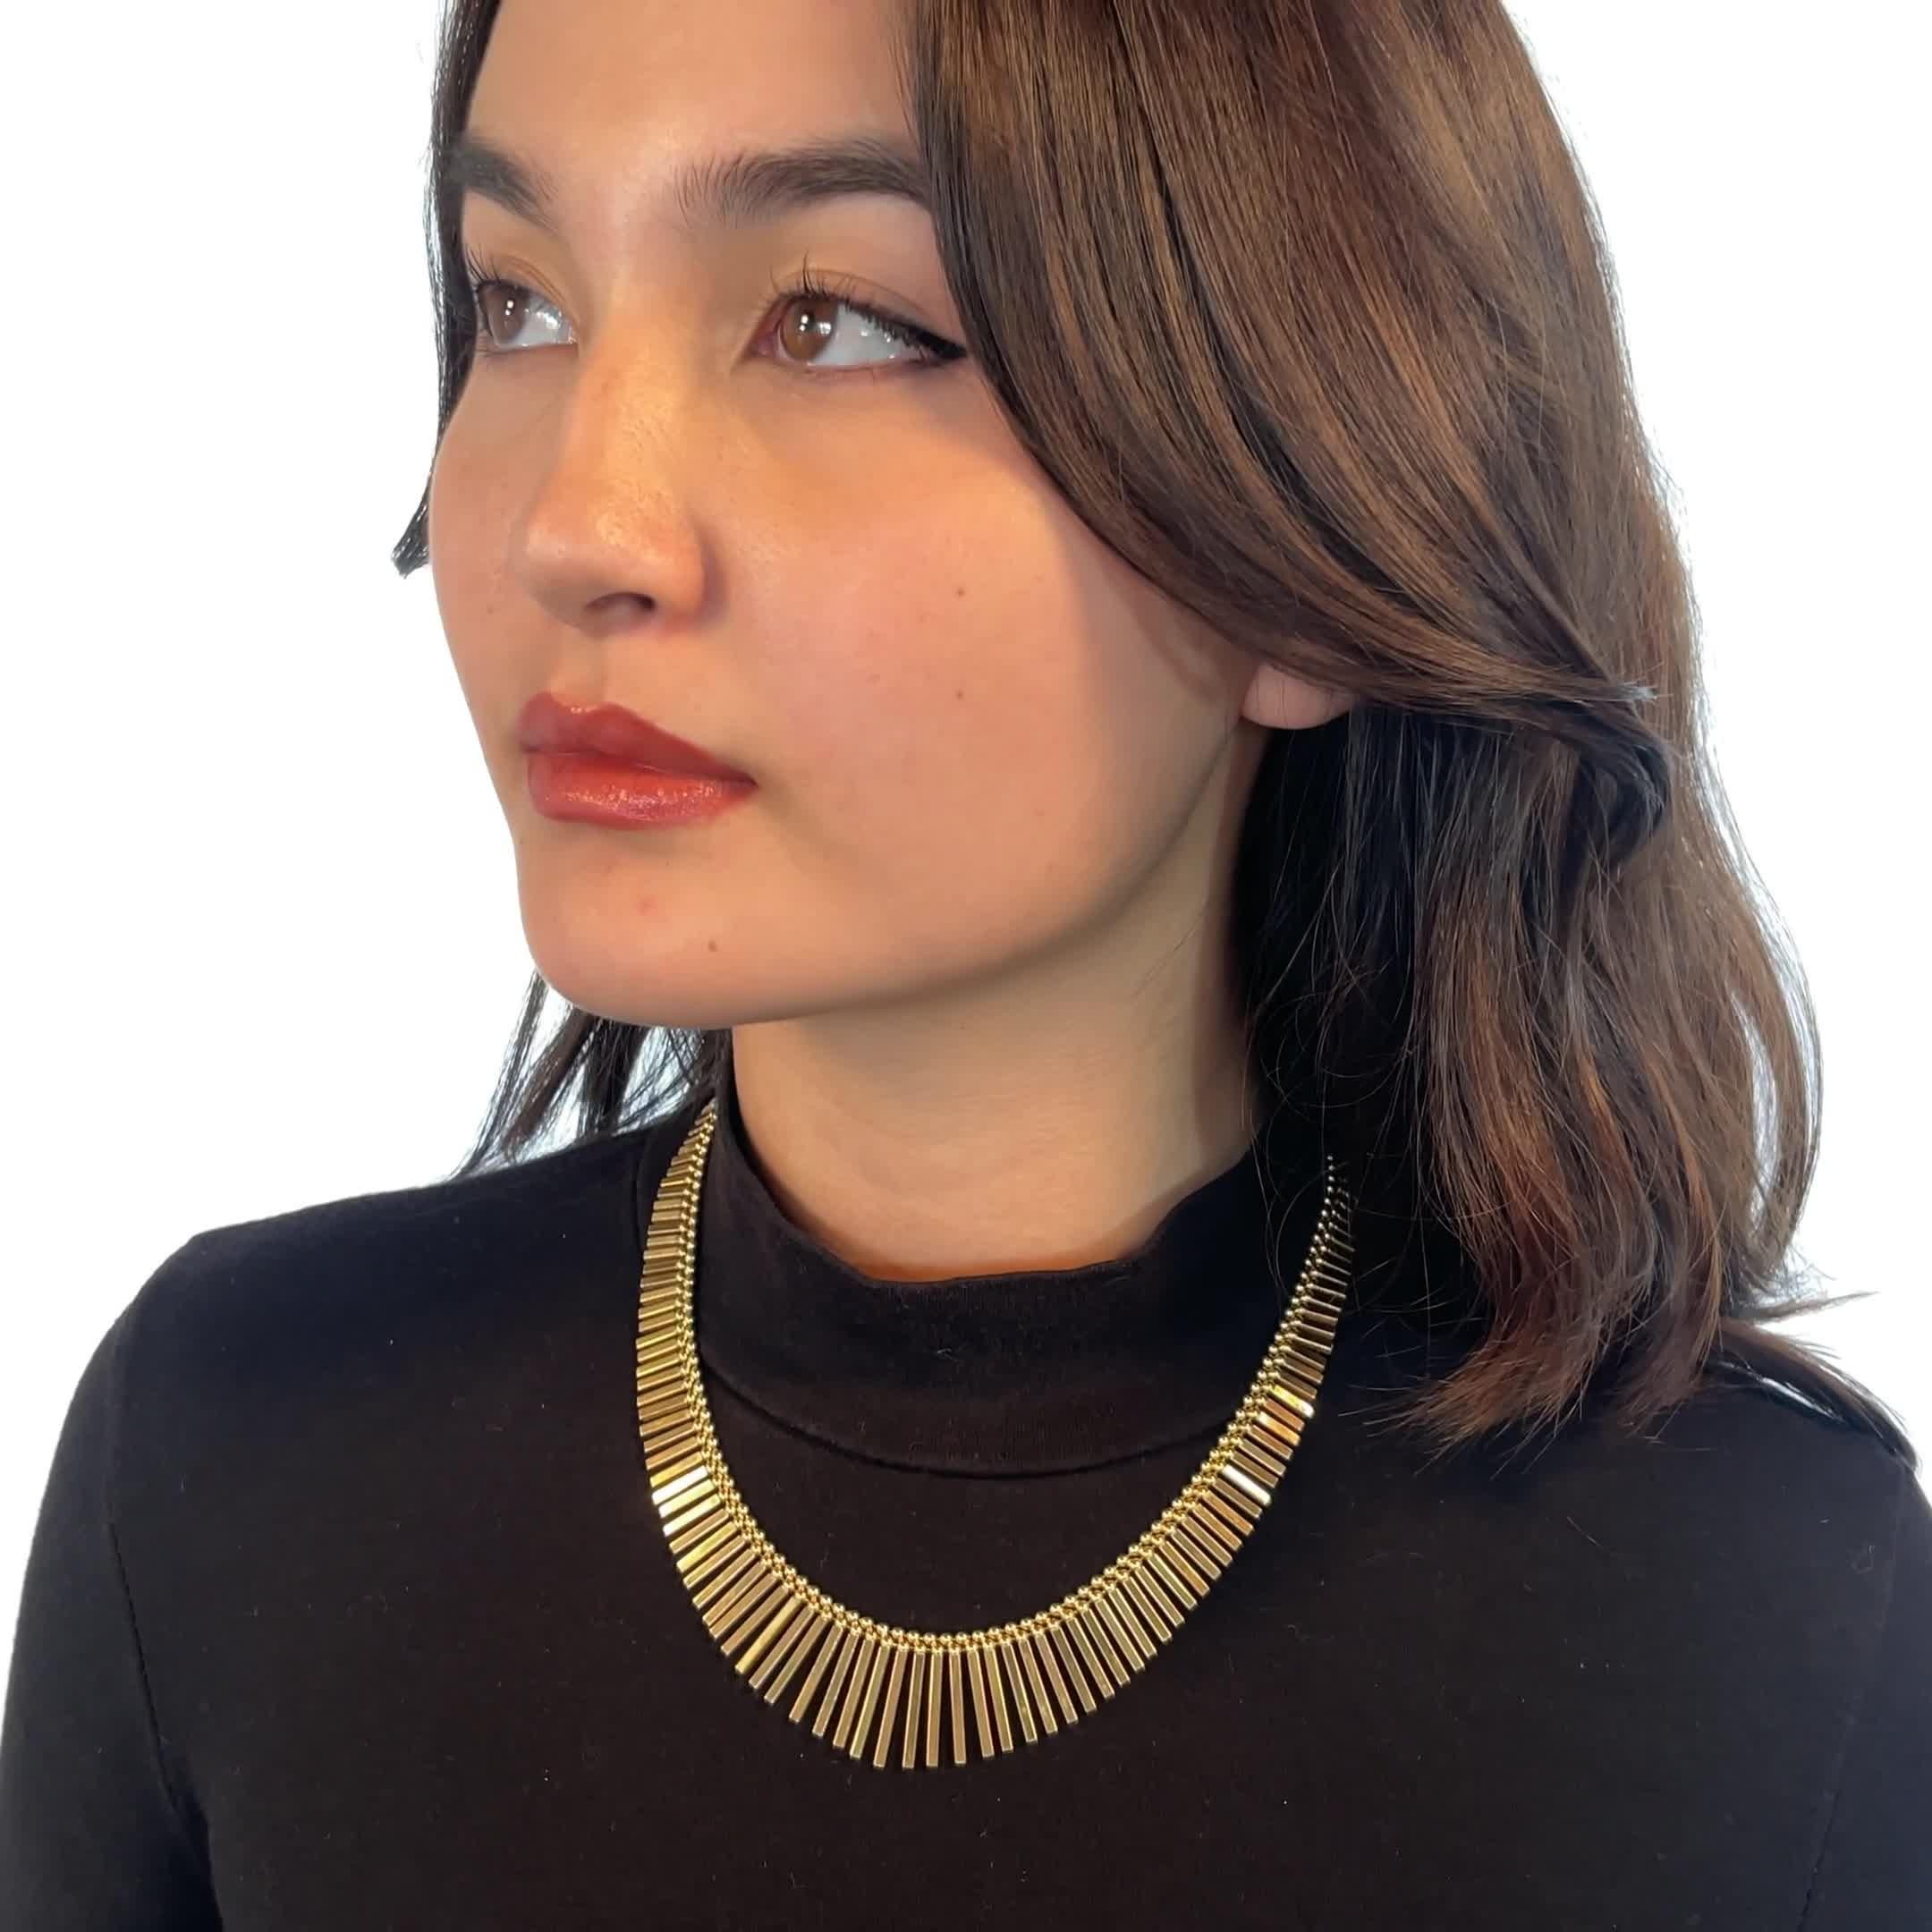 Vintage Italian 18 Karat Gold Fringe Collar Necklace. Italian hallmarks. Circa 1980s. 17 inches. 

About The Piece: Do you like to stay on top of fashion trends? Solid gold pieces are a hot trend these days. This stunning Vintage Italian 18 Karat